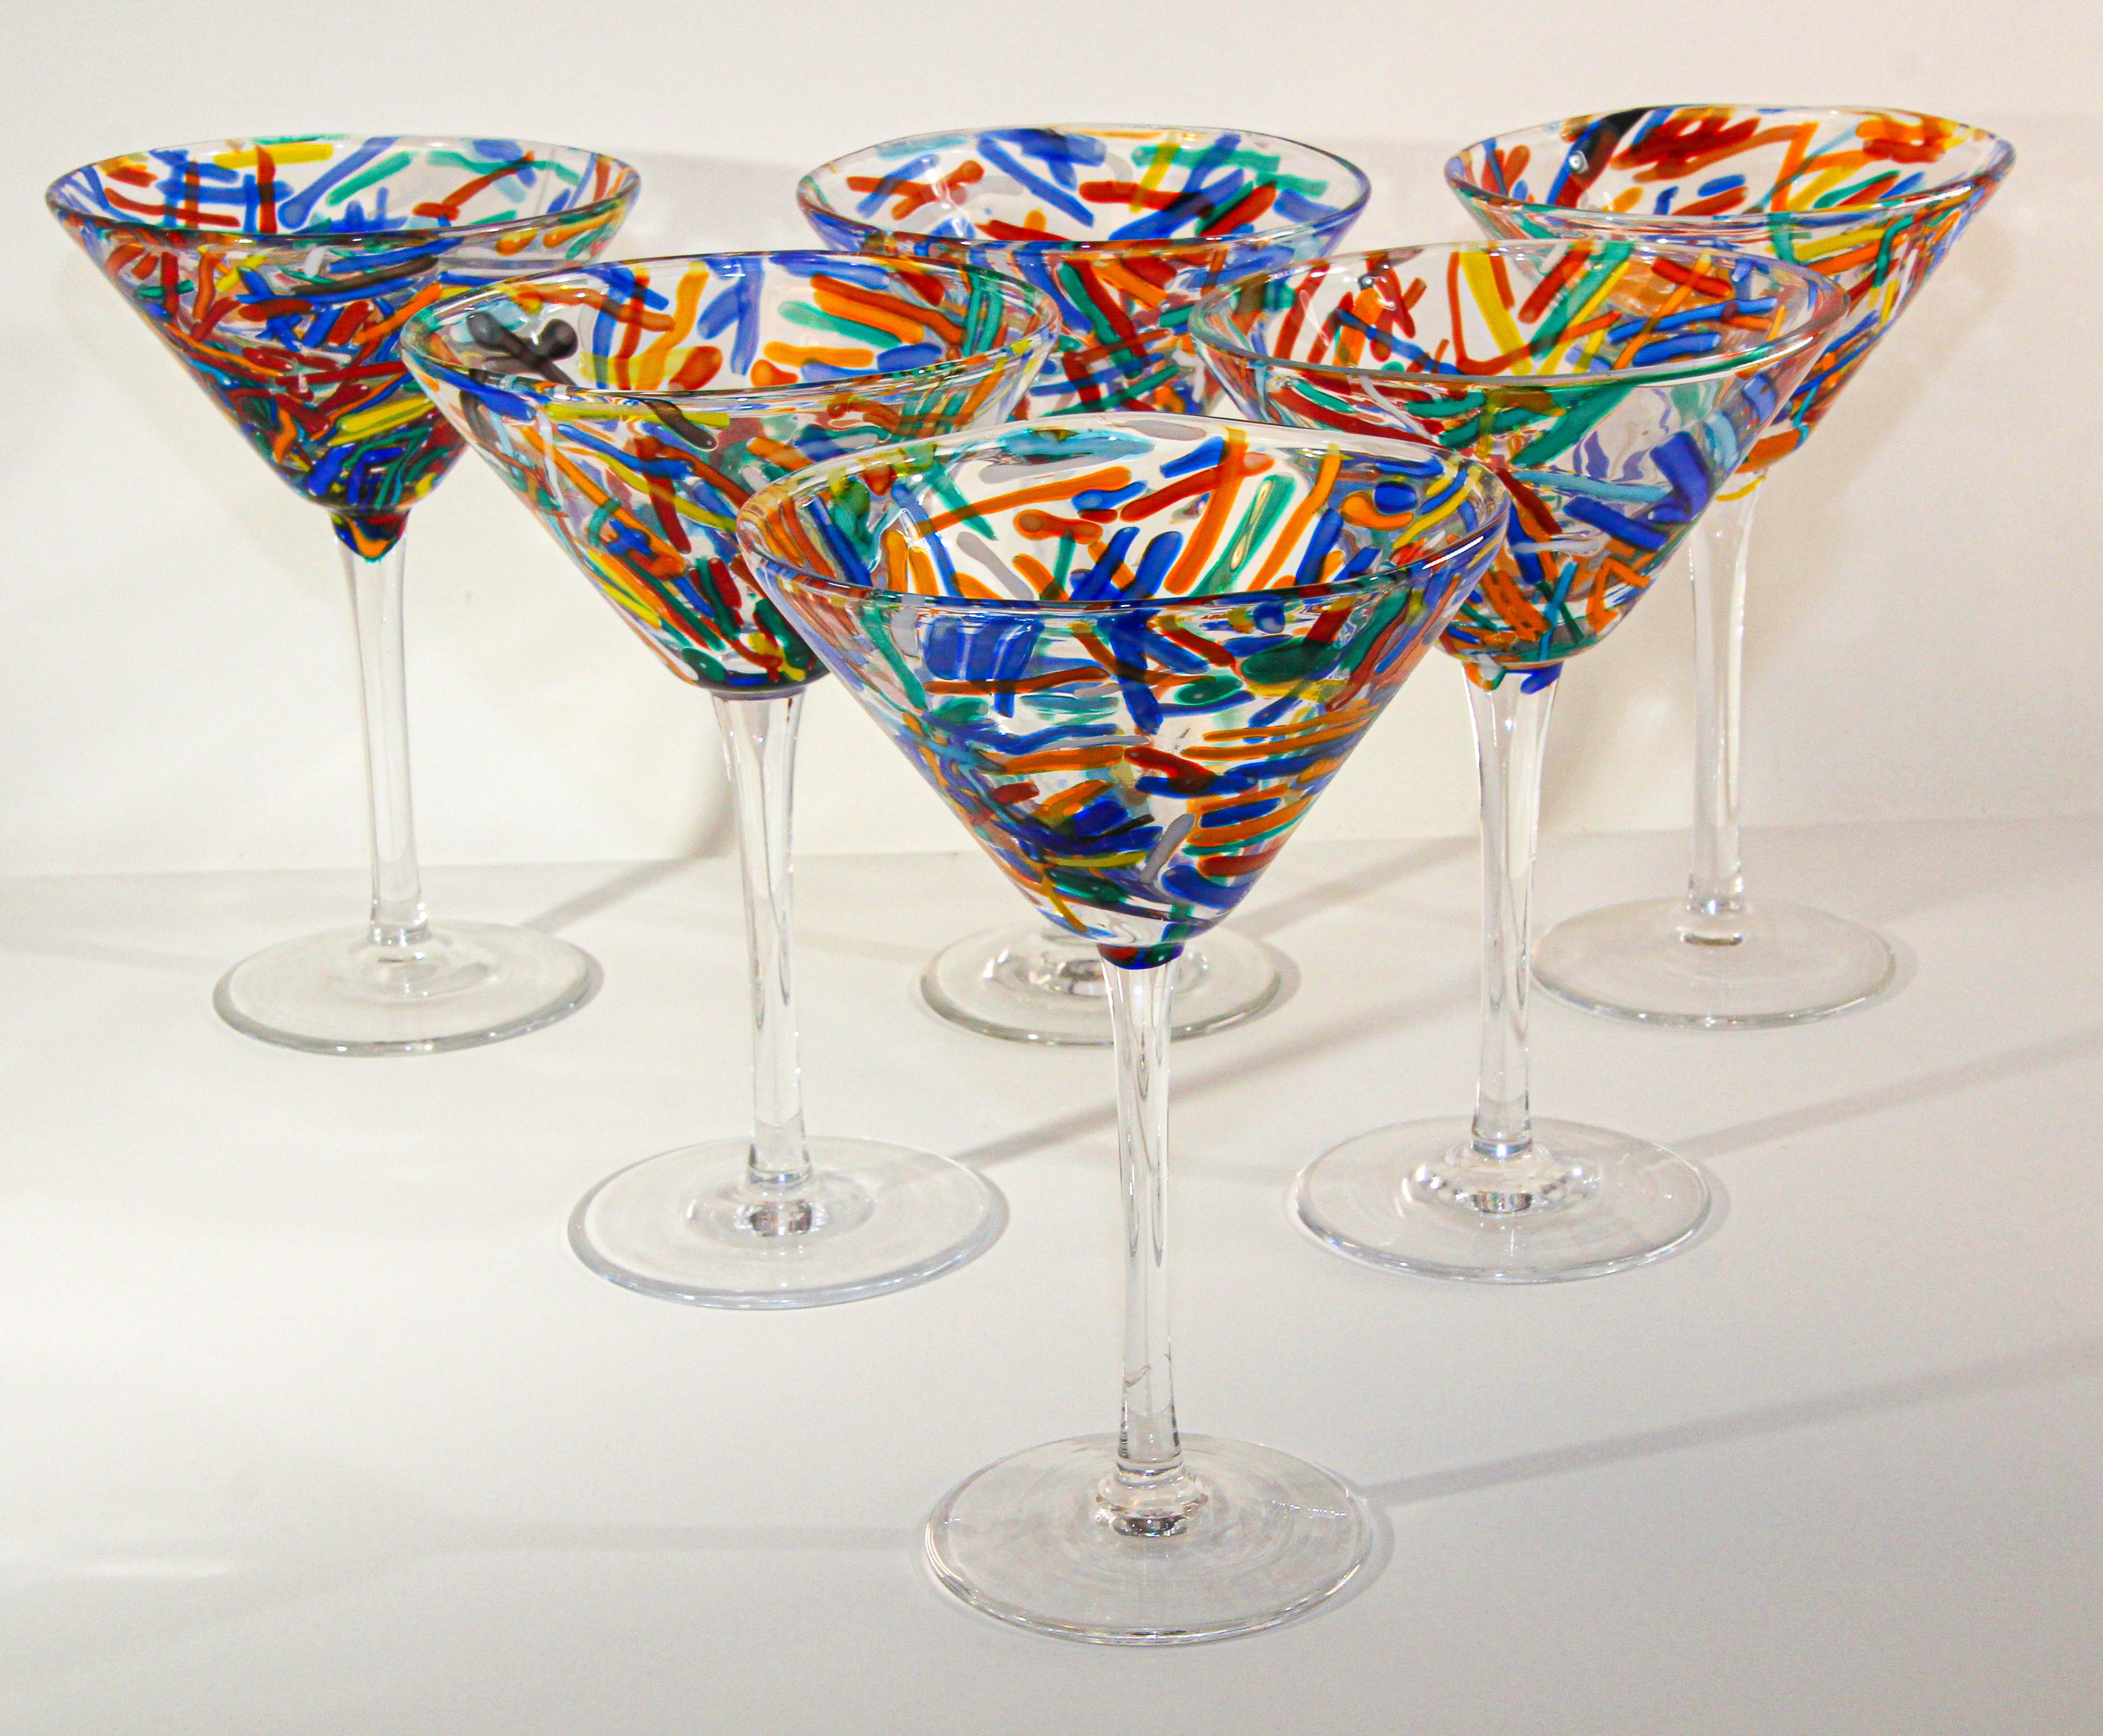 Vintage Post Modern Murano Martini Glasses Set of 6 Colorful Barware
The glasses are hand blown with colorful different design, each one is unique.
Measures: 4.75